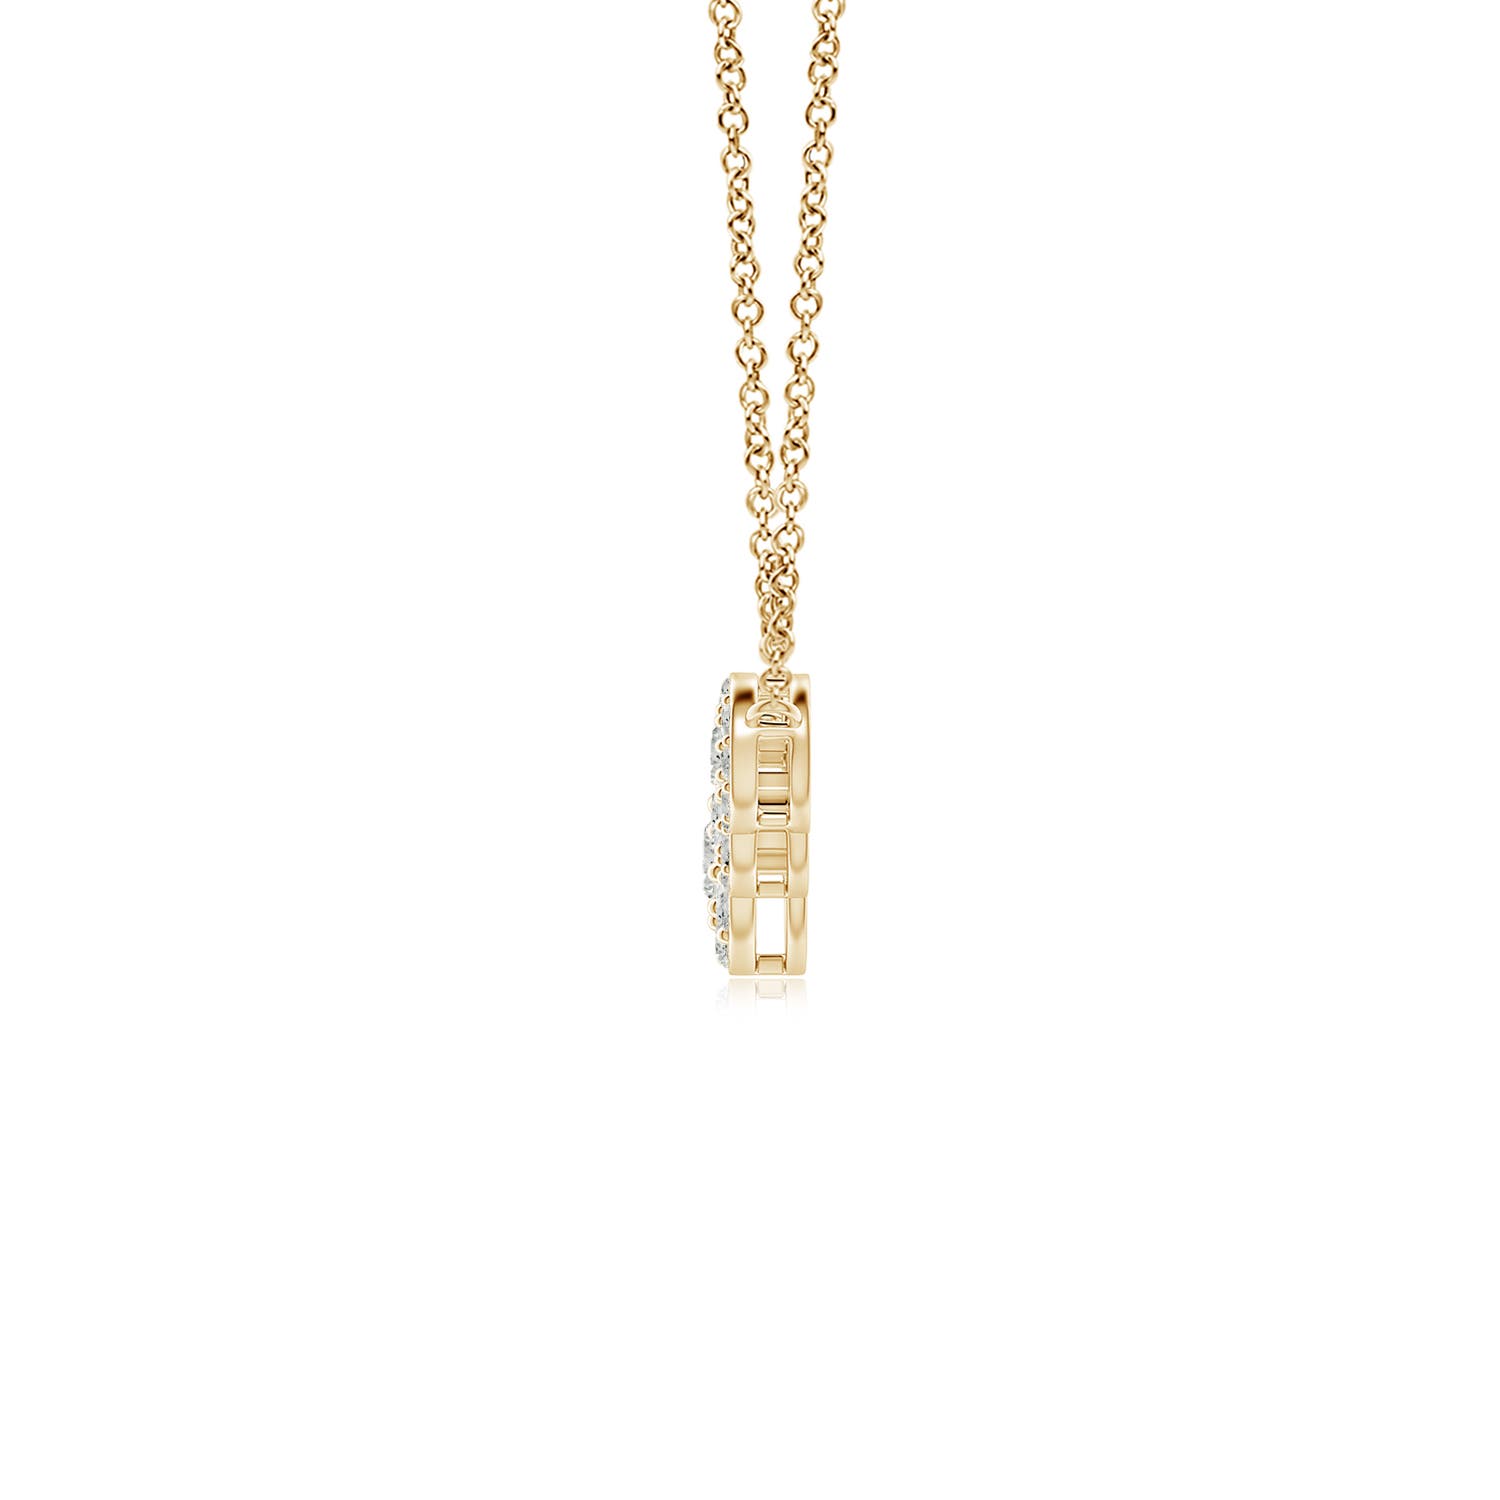 K, I3 / 1.48 CT / 14 KT Yellow Gold